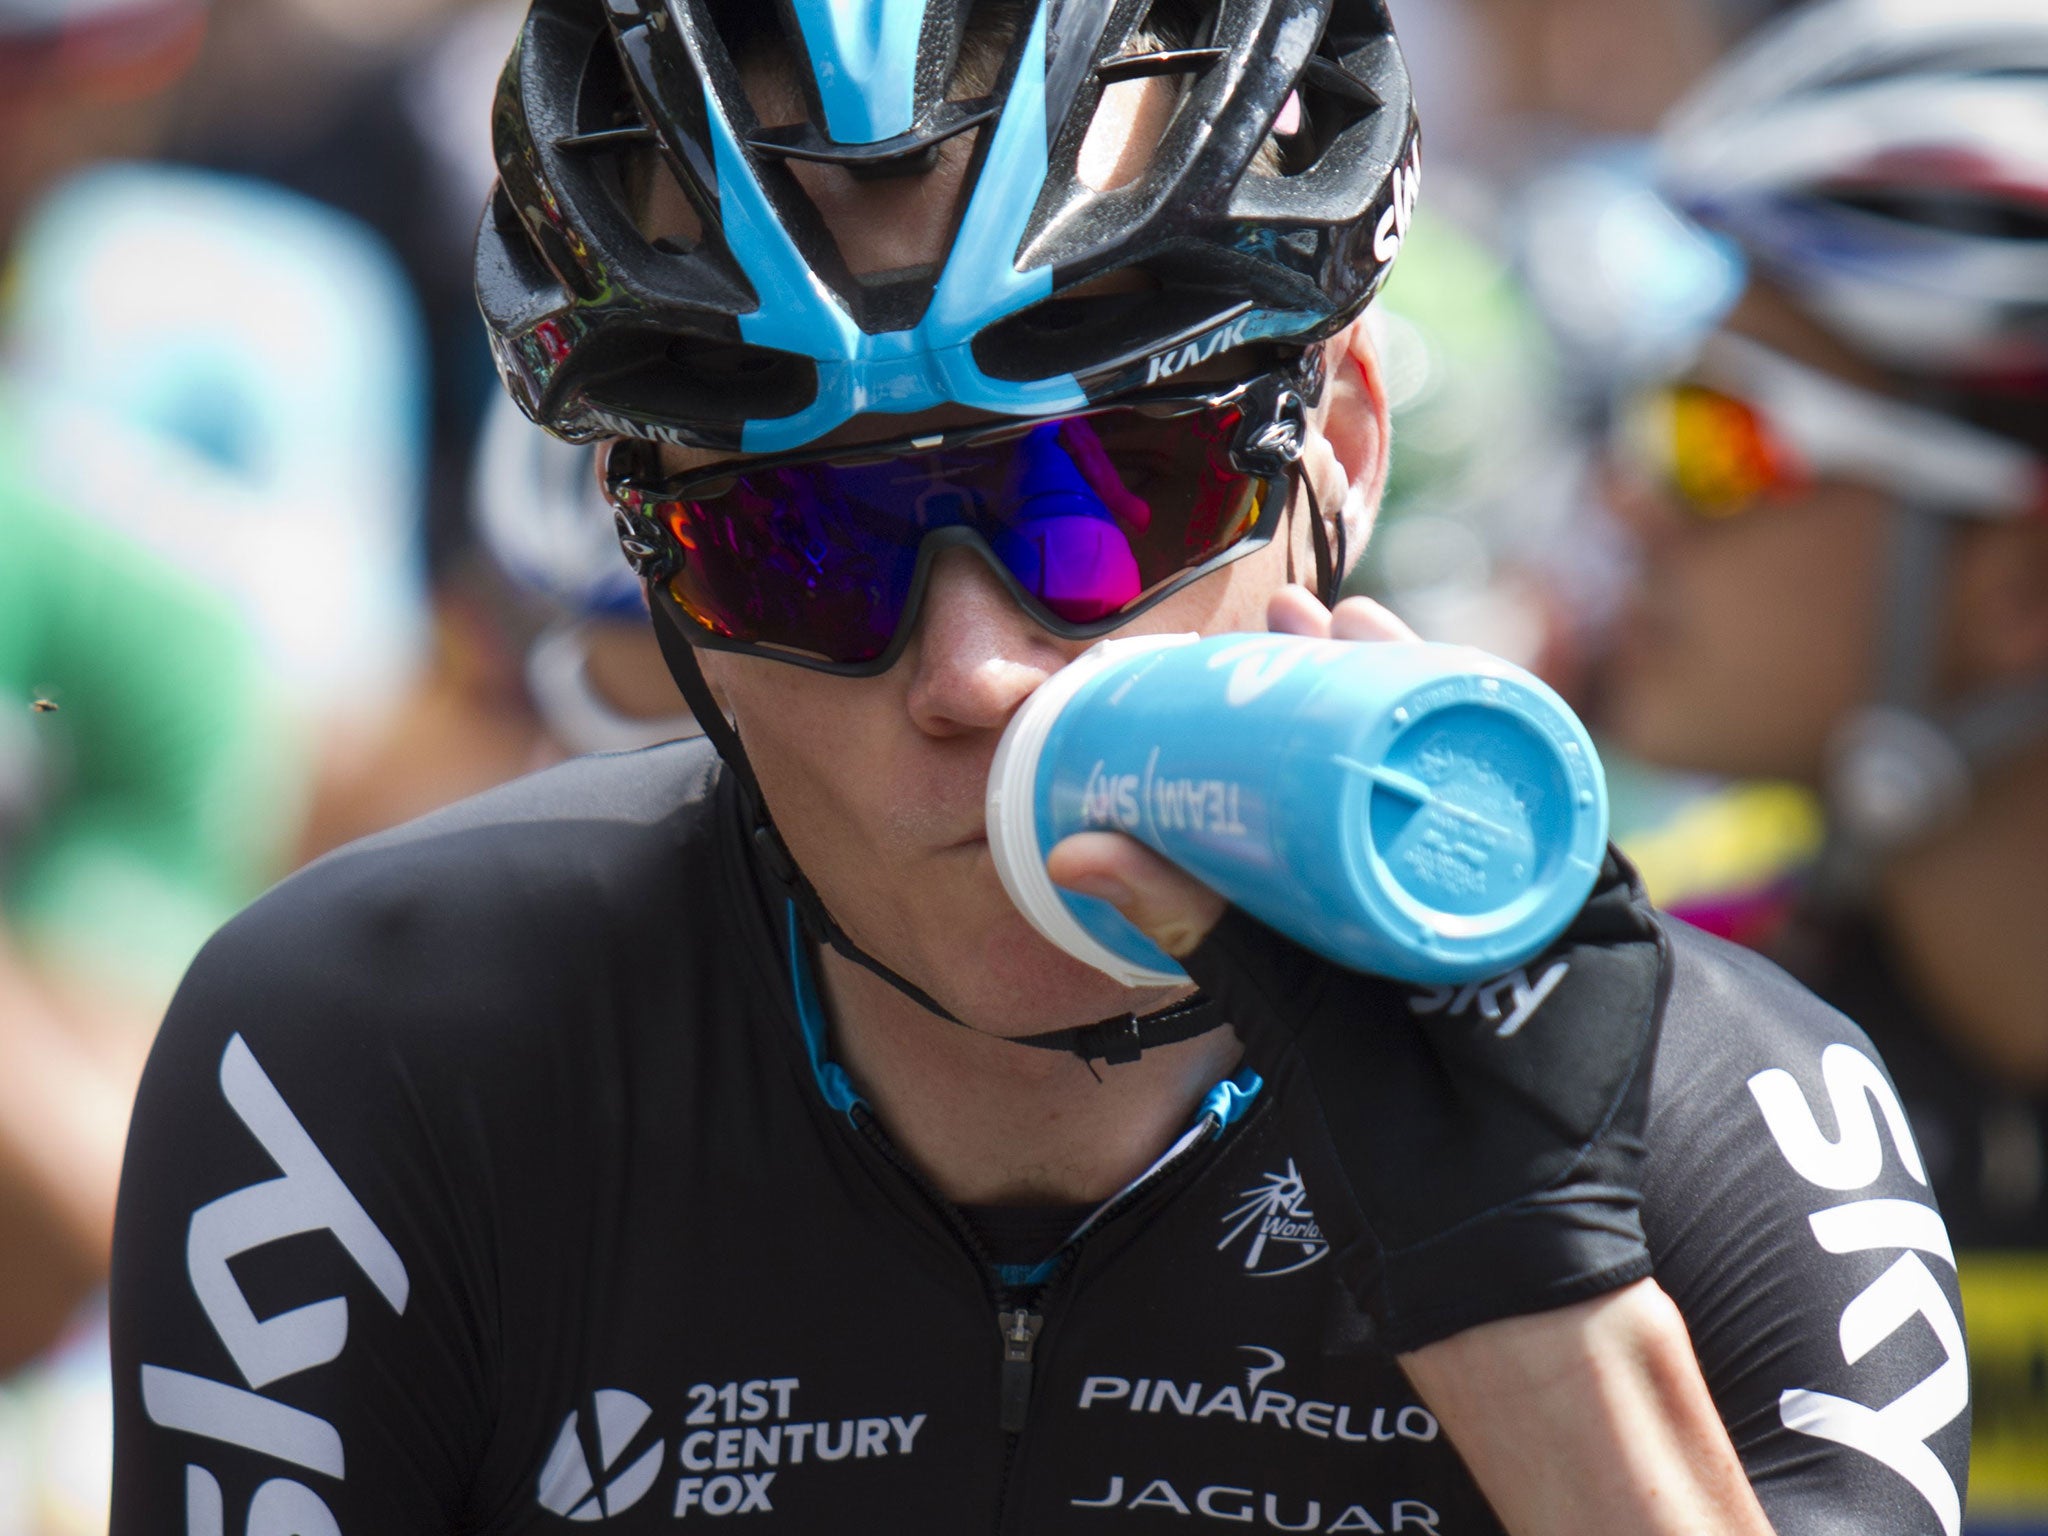 Chris Froome on the Vuelta